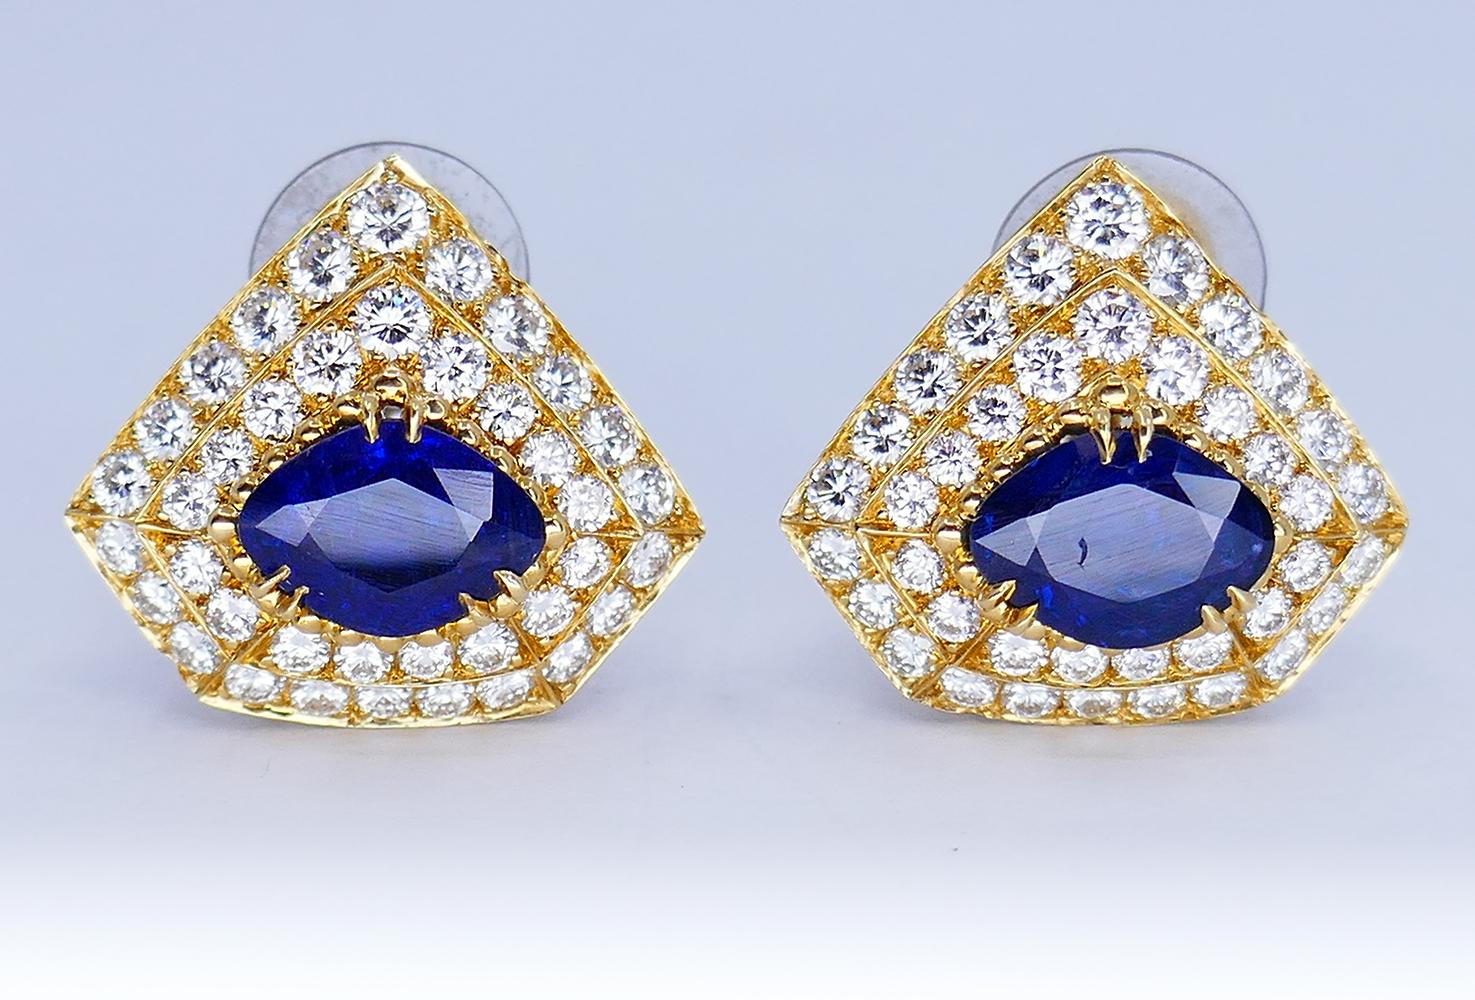 Areza Vintage French Earrings 18k Gold Sapphire Diamond Estate Jewelry For Sale 4